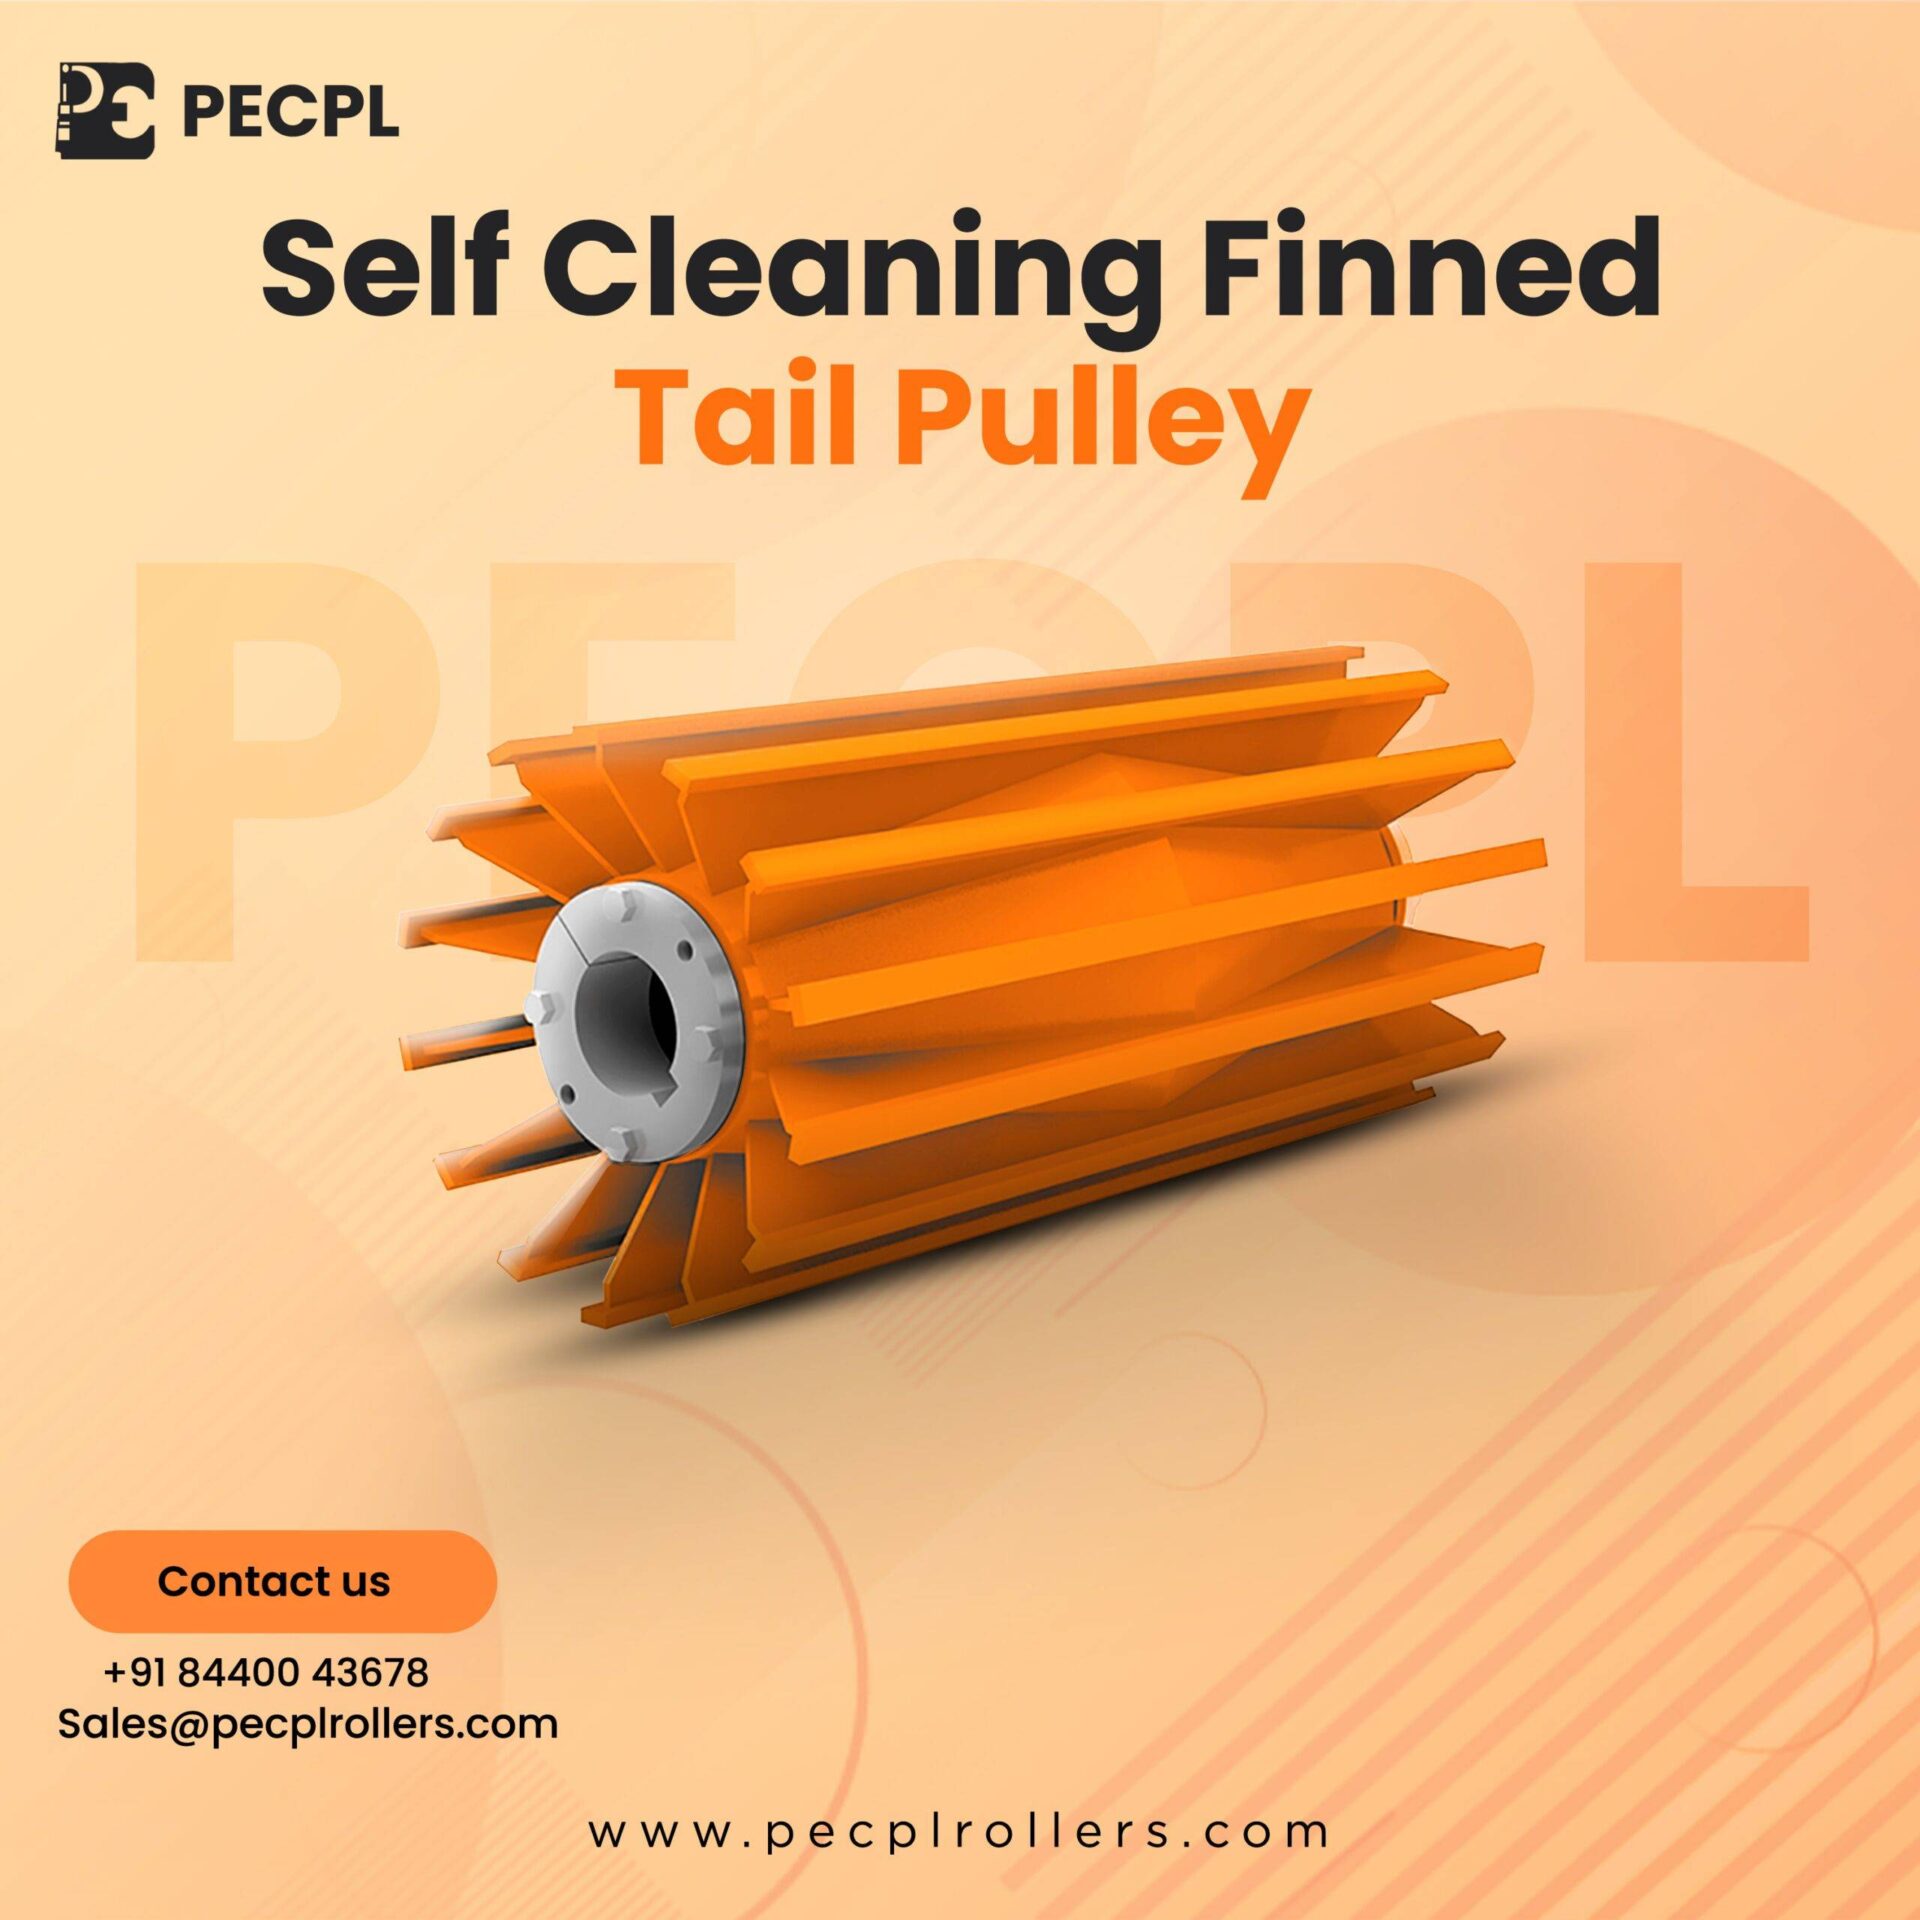 Self Cleaning Finned Tail Pulley